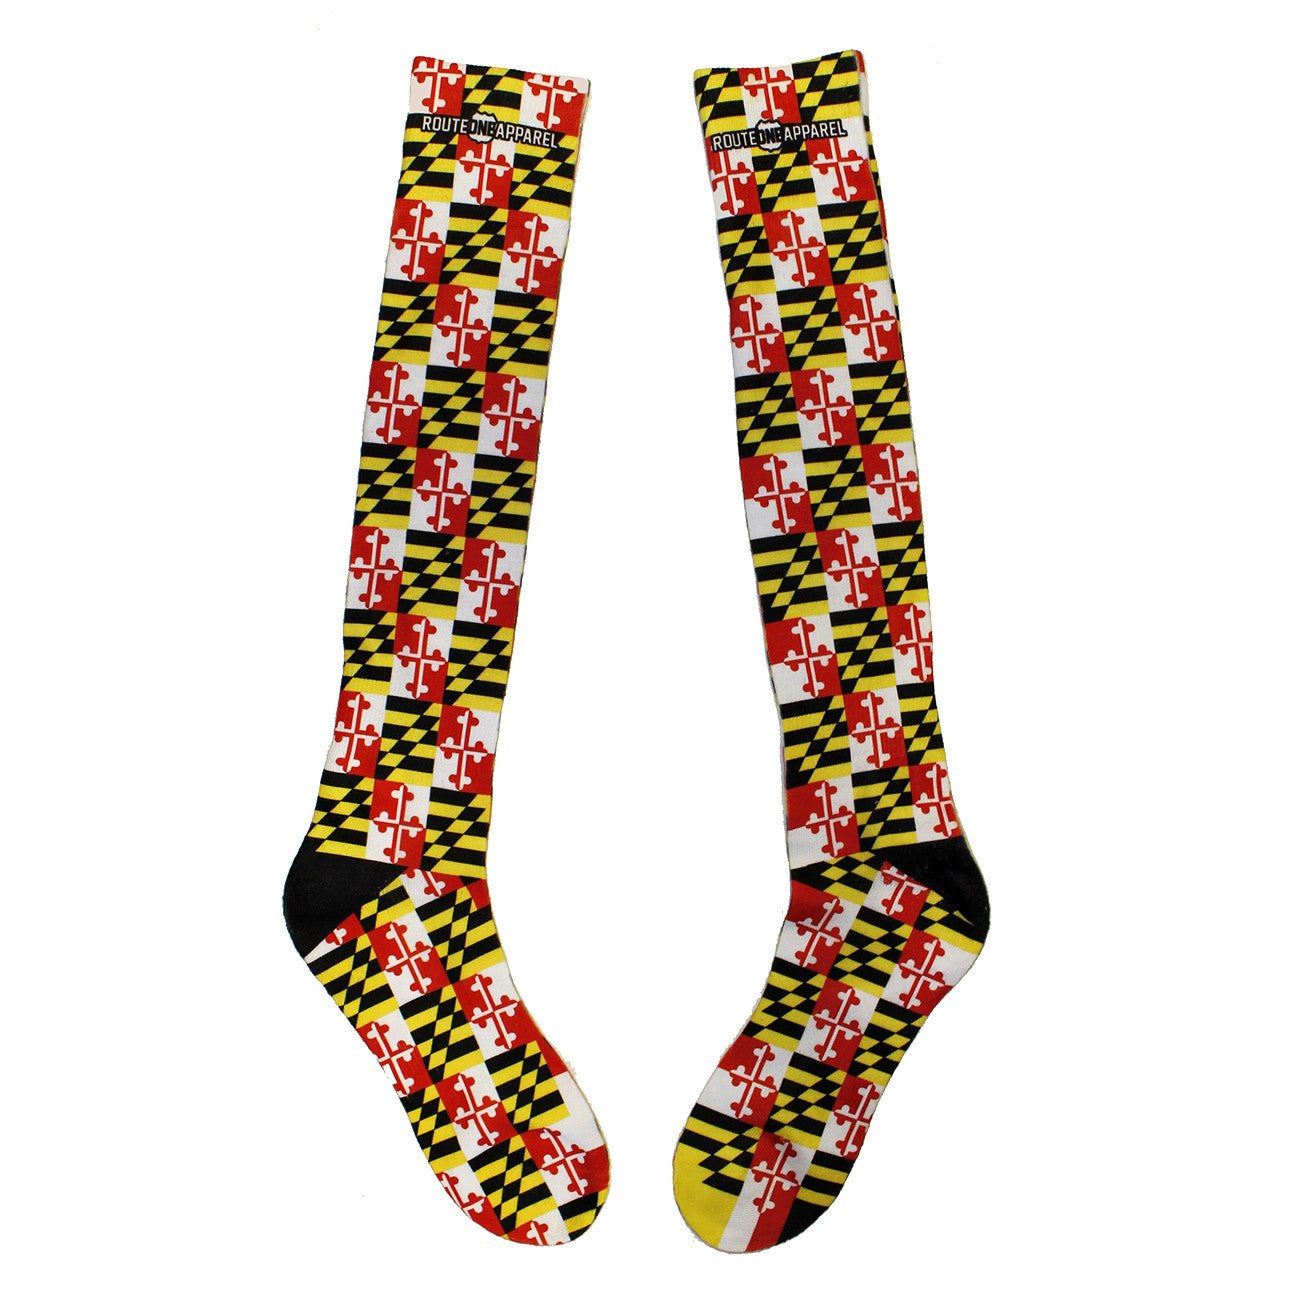 Maryland Flag / Knee-High Socks - Route One Apparel